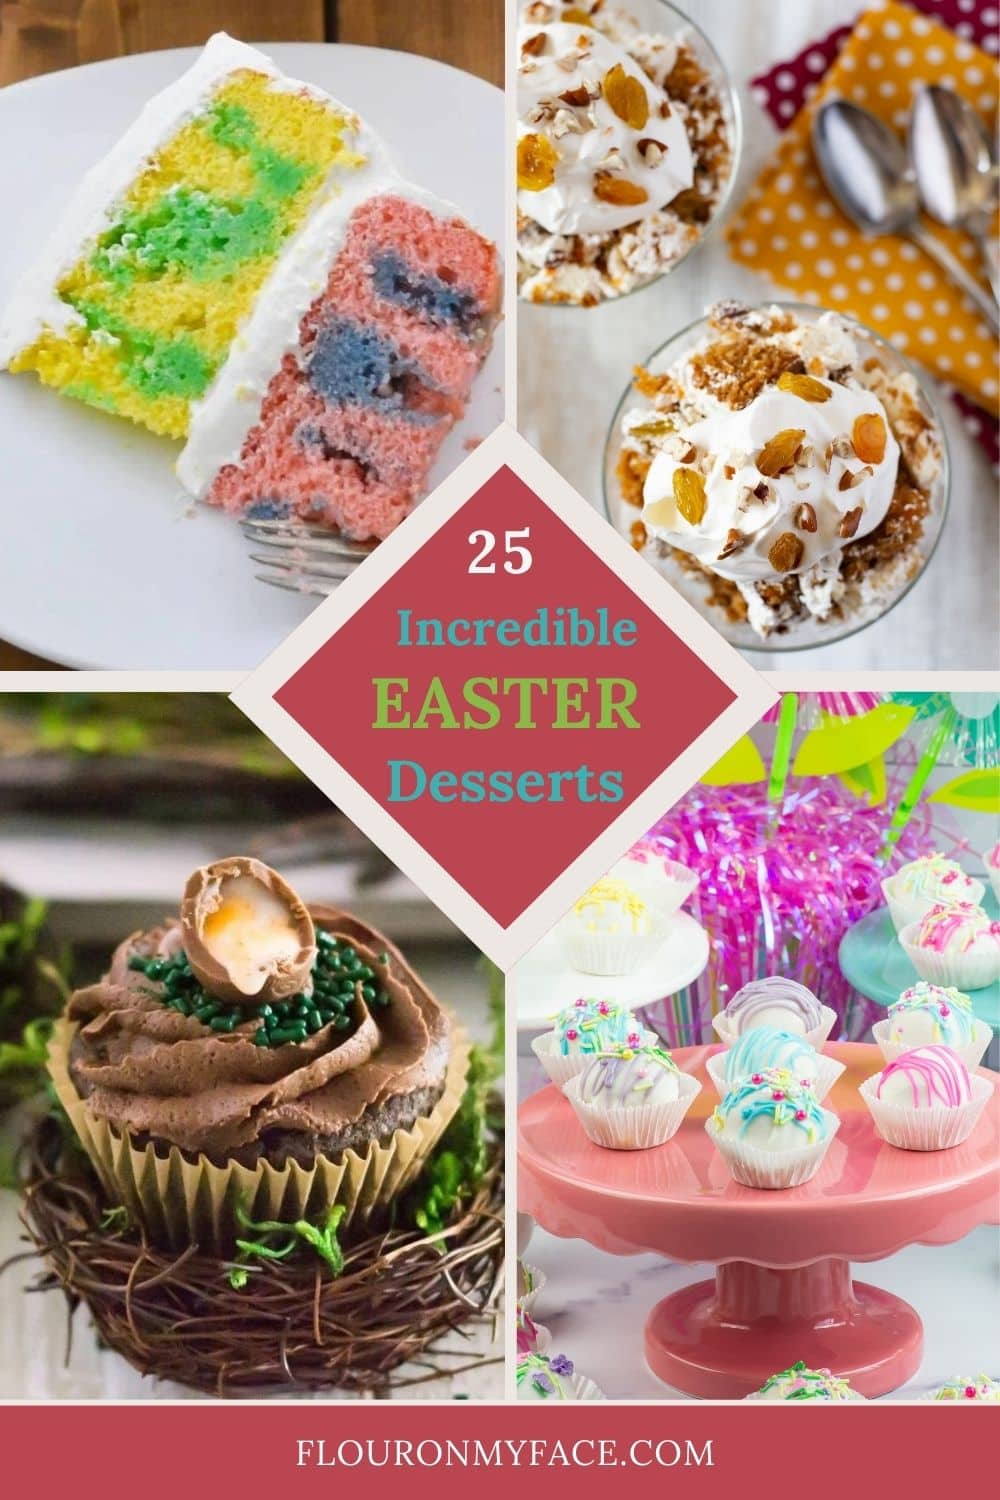 Large 4 image collage for 25 Incredible Easter Dessert recipes.